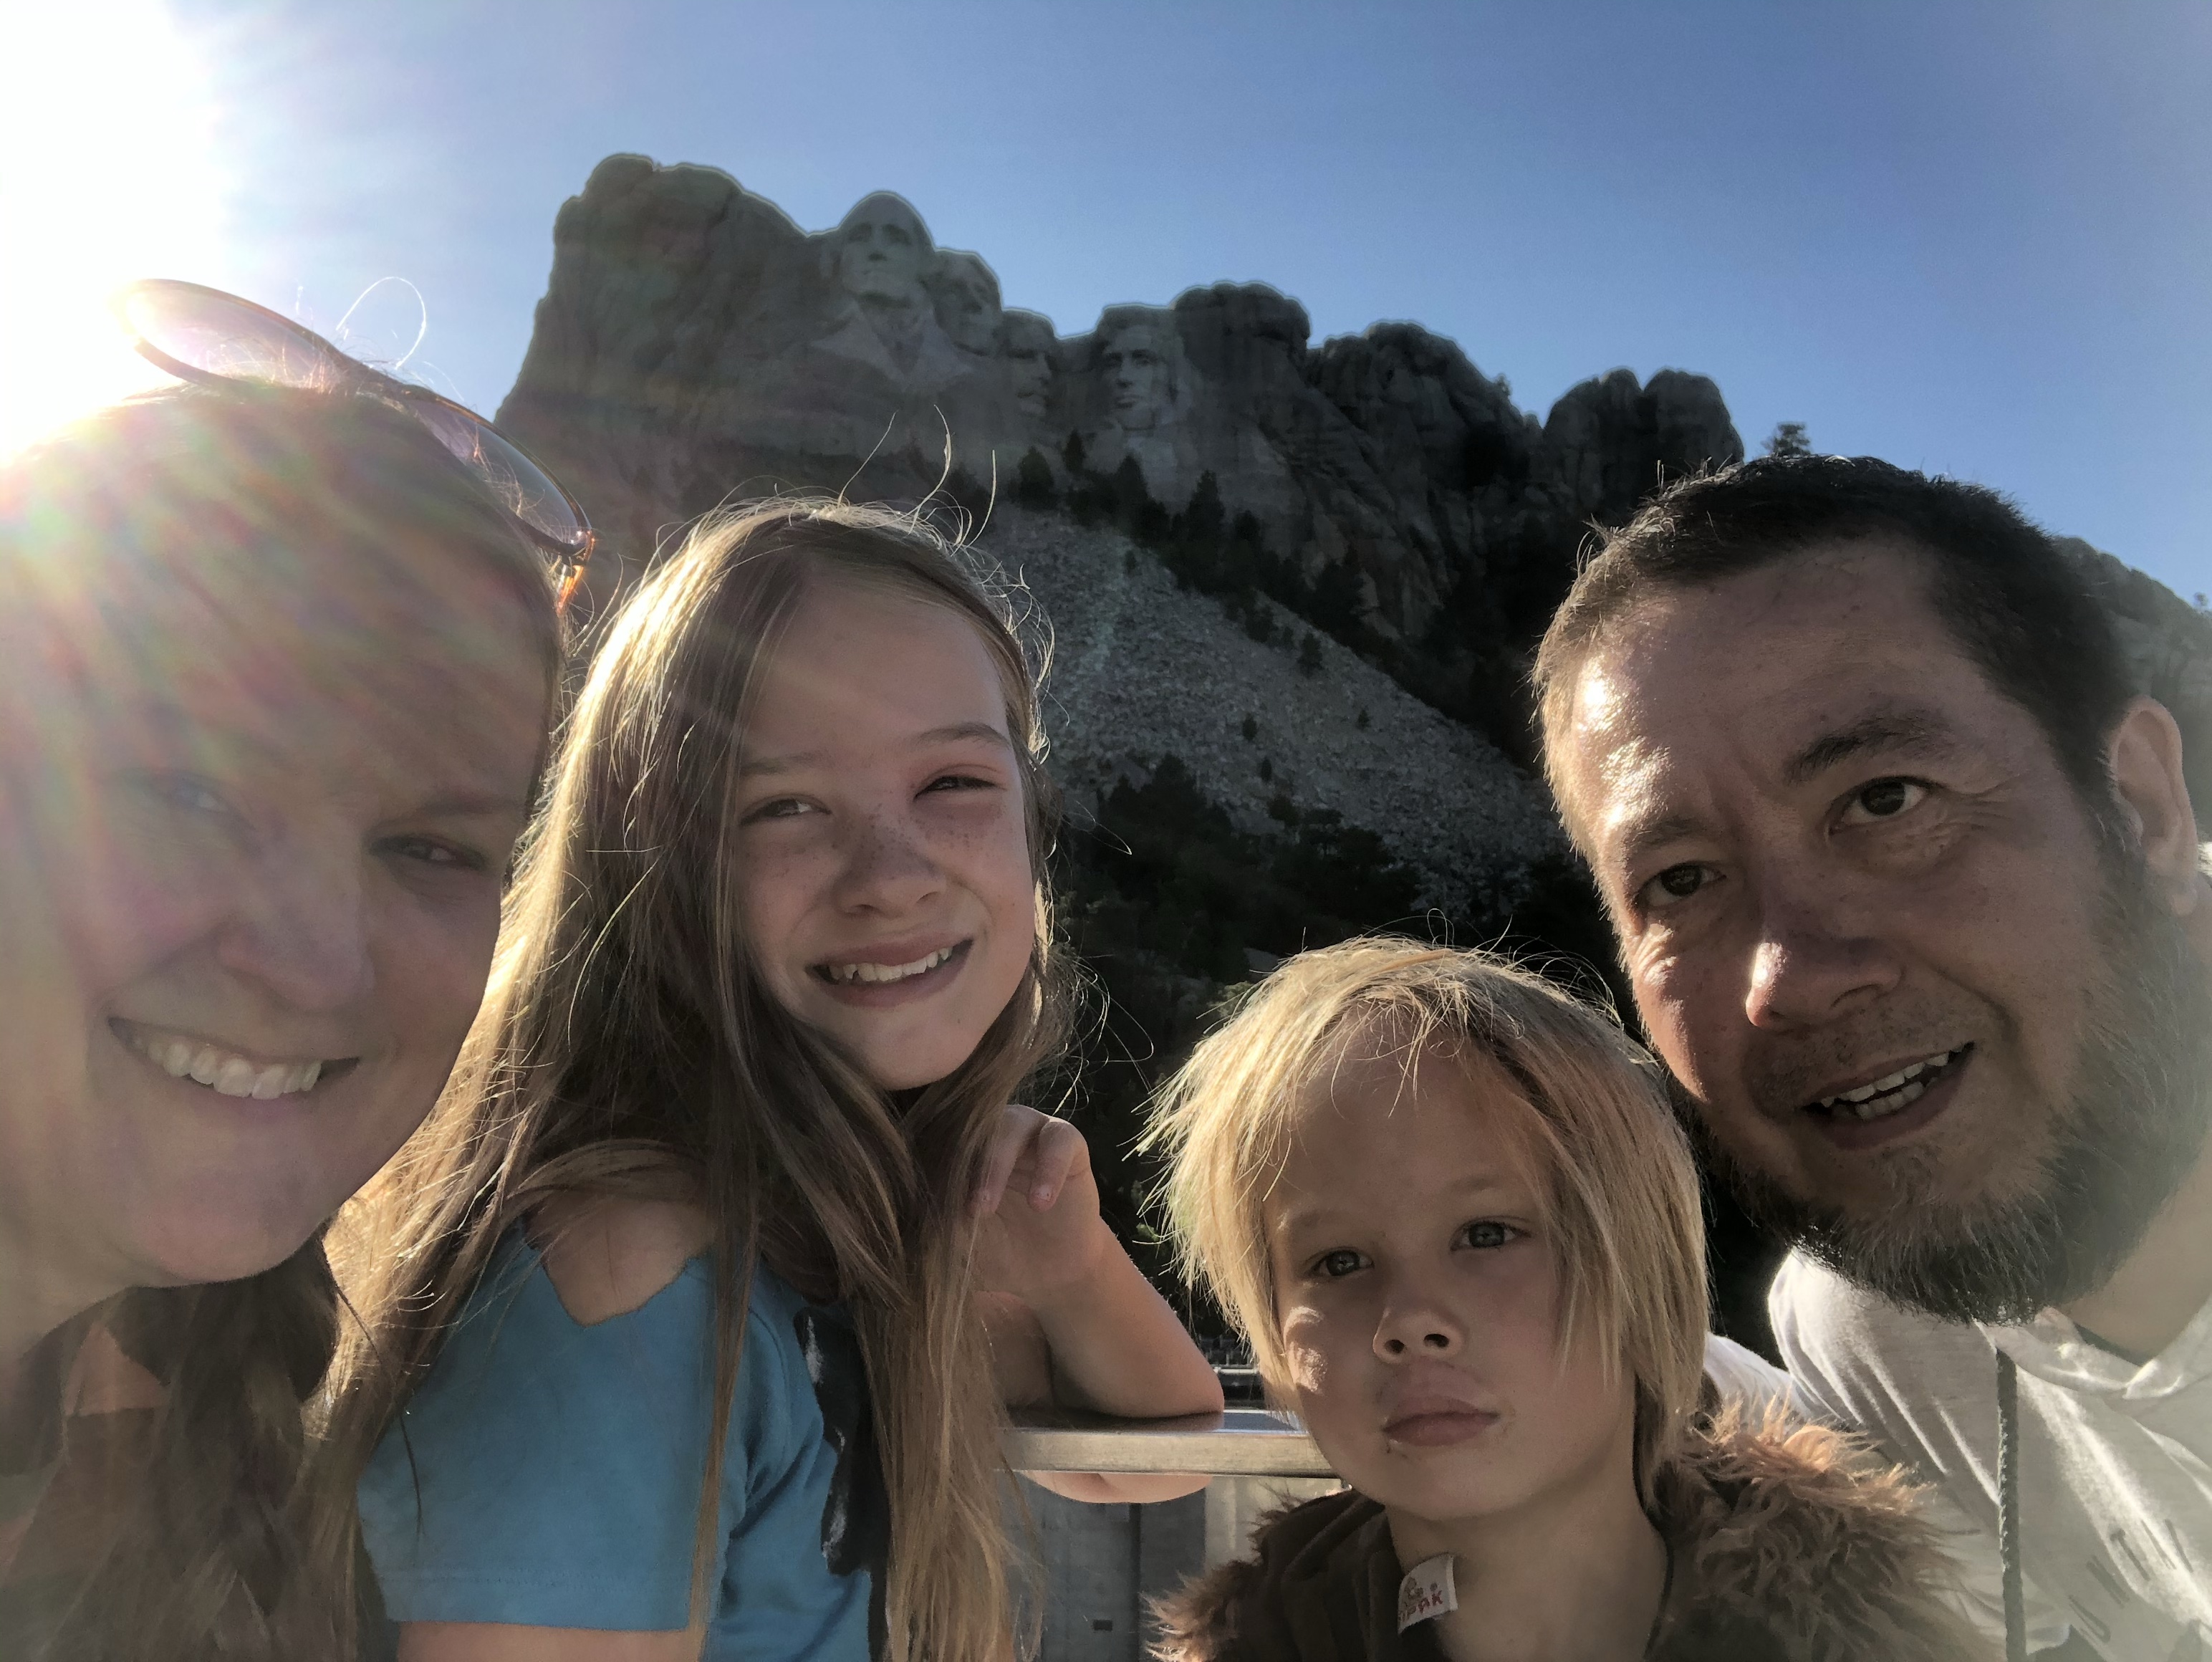 Our family standing in front of the faces of Mount Rushmore